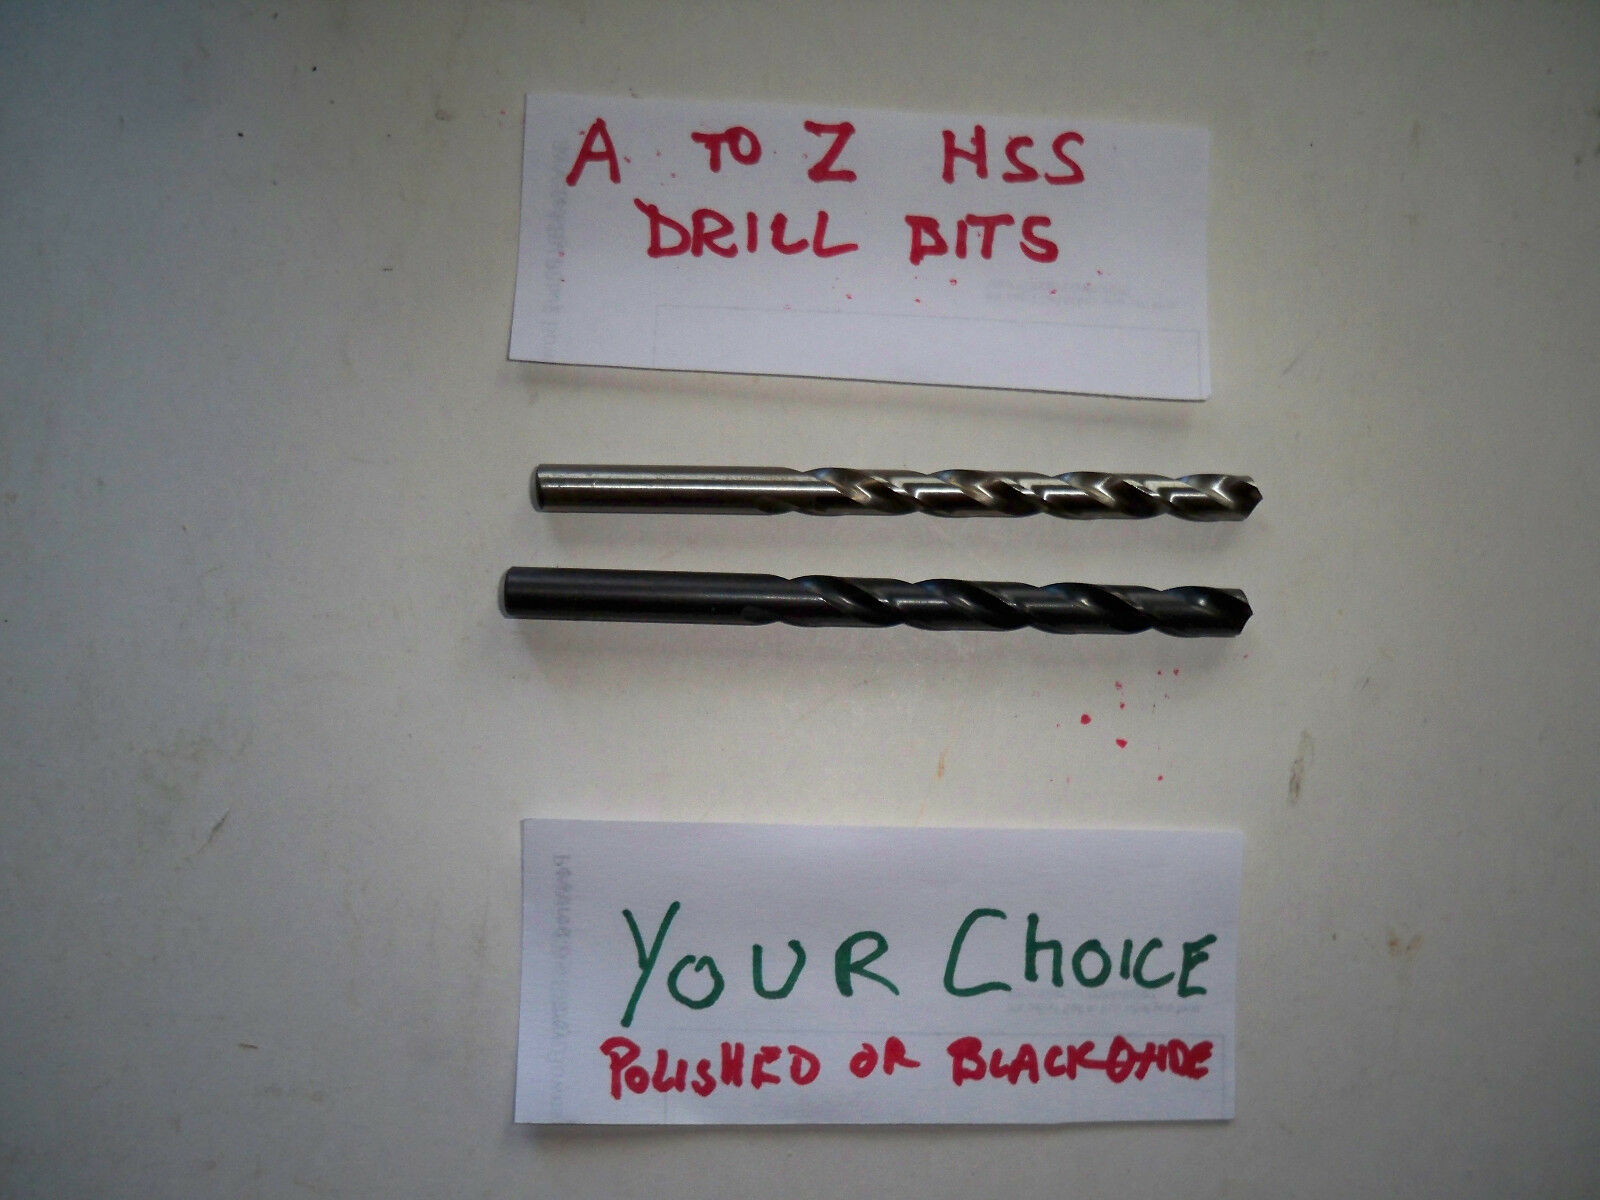 Hss Drill Bits Letter A To Z Polished (p) & Black Oxide (bo) Most Made In Usa